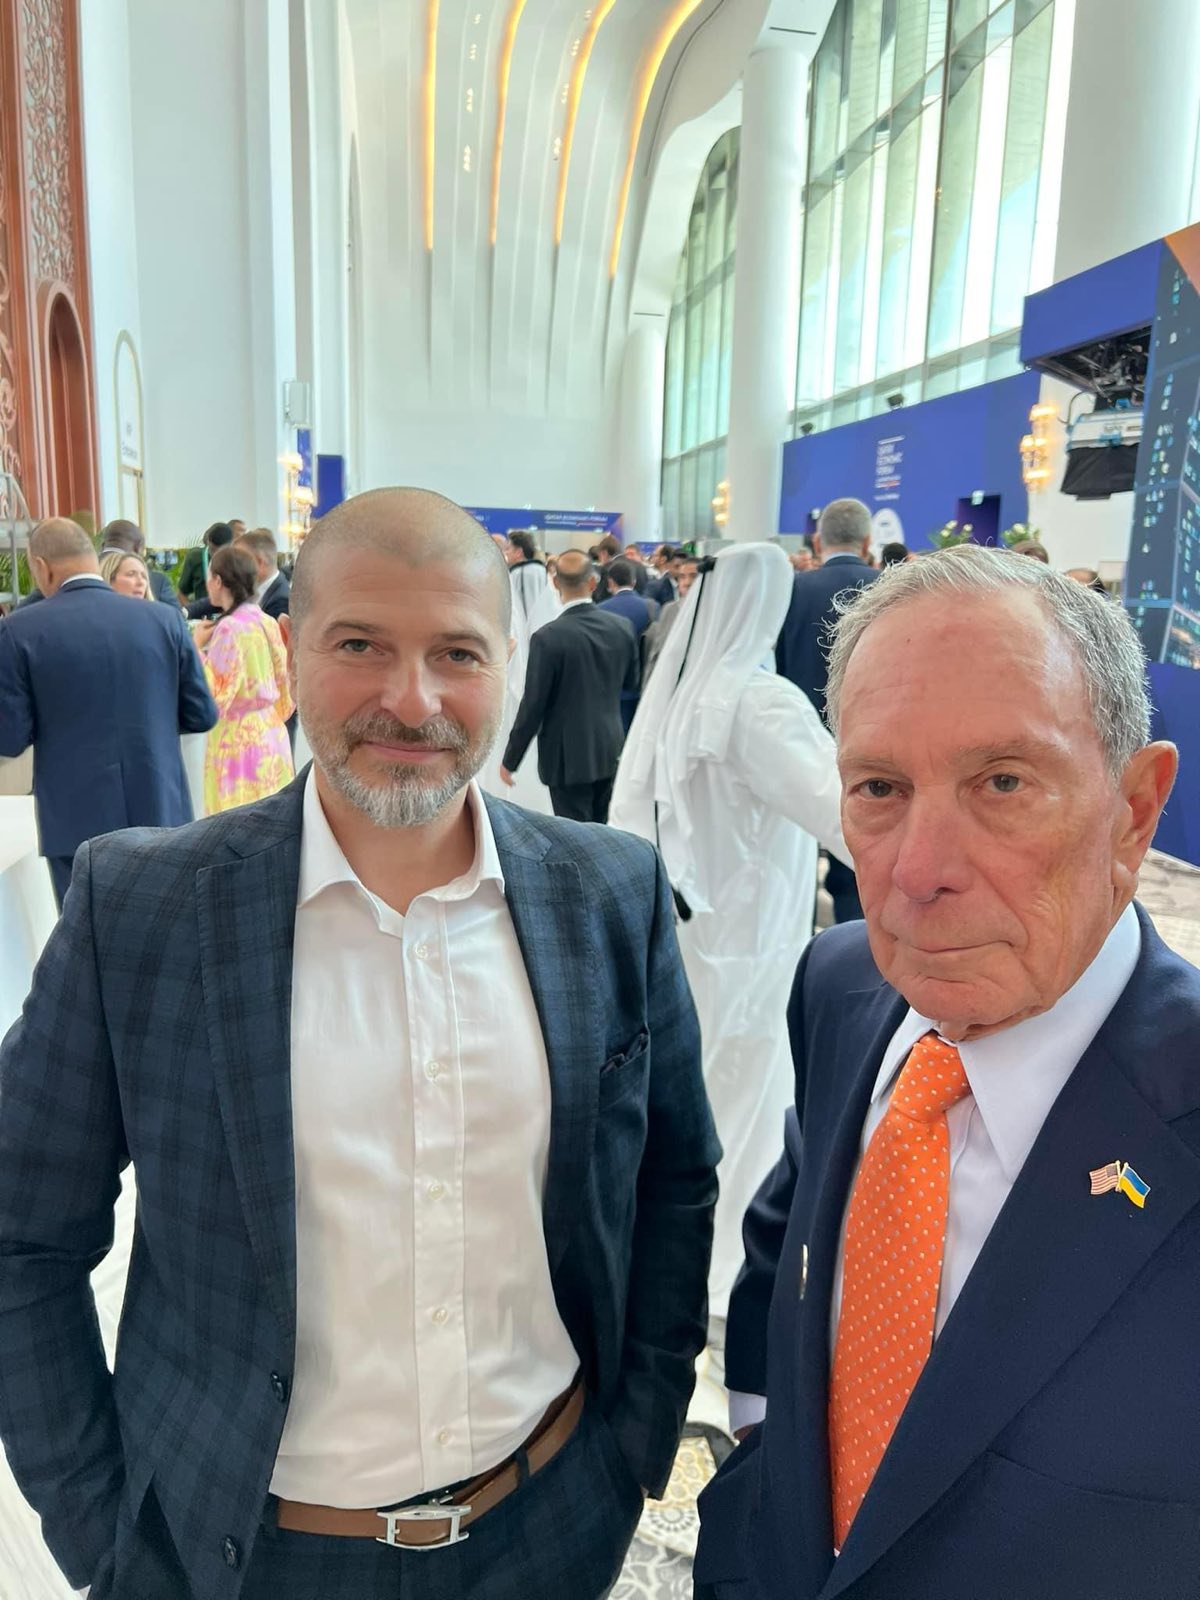 Plamen Russev with Michael Bloomberg